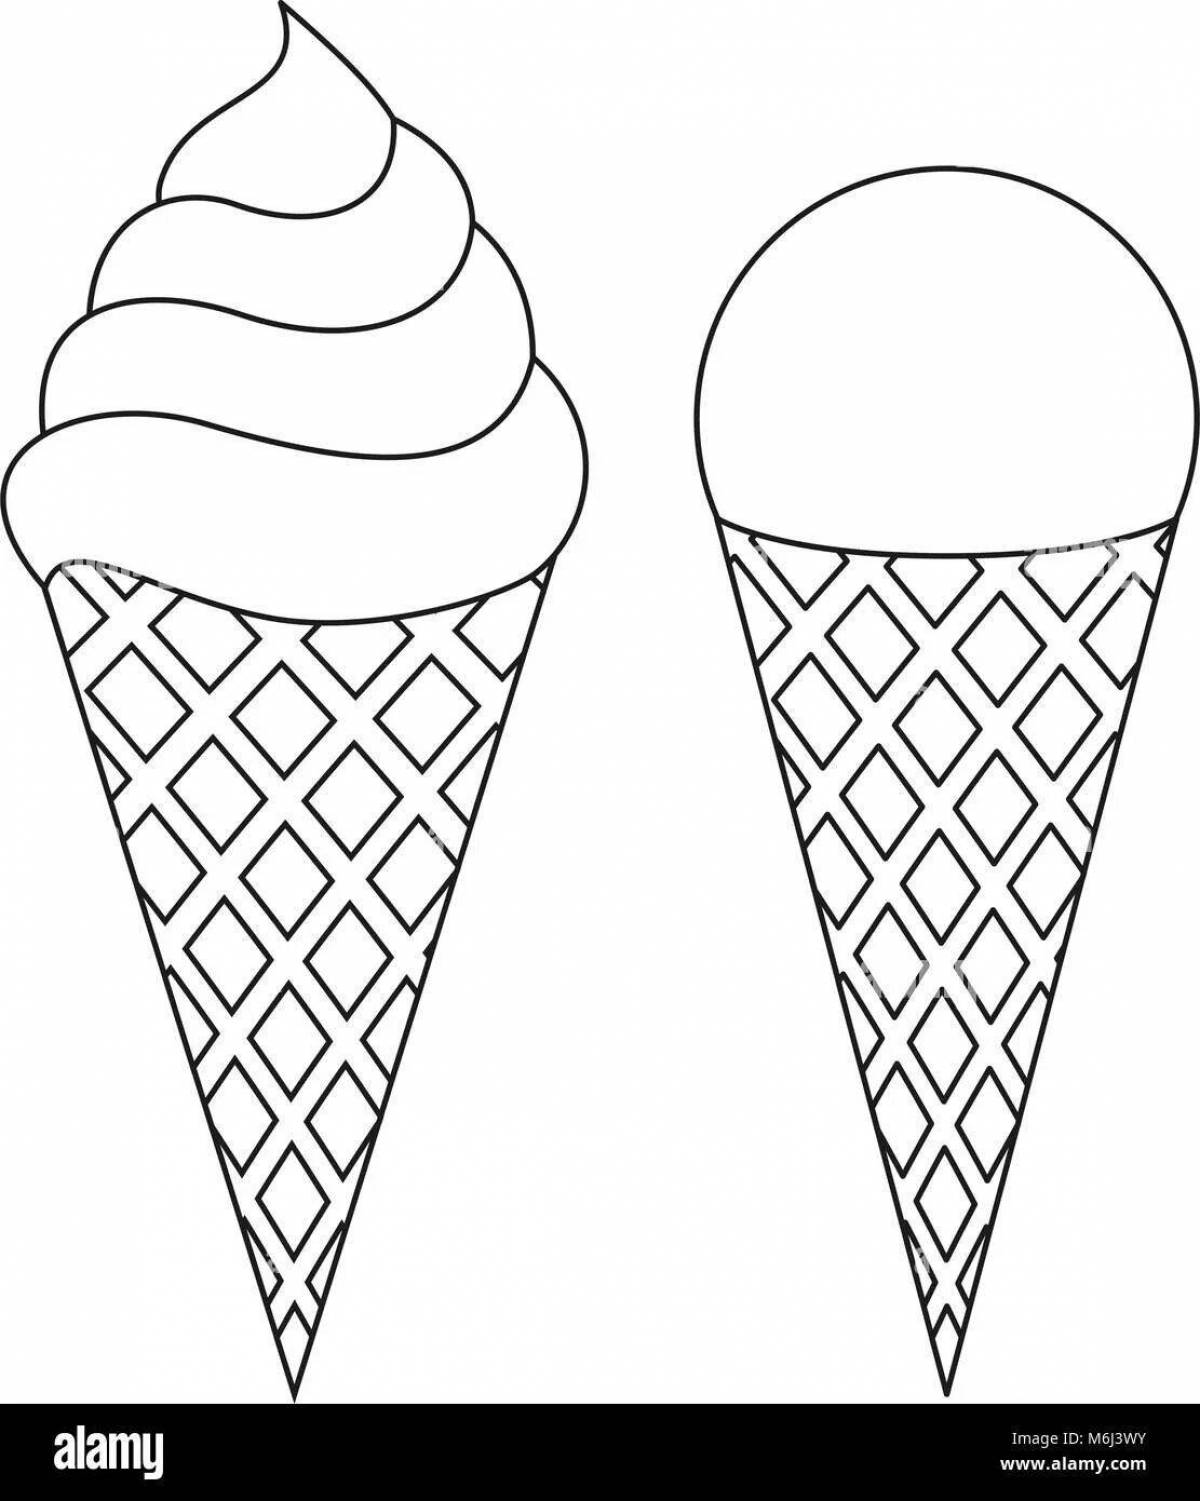 Lovely horn coloring page